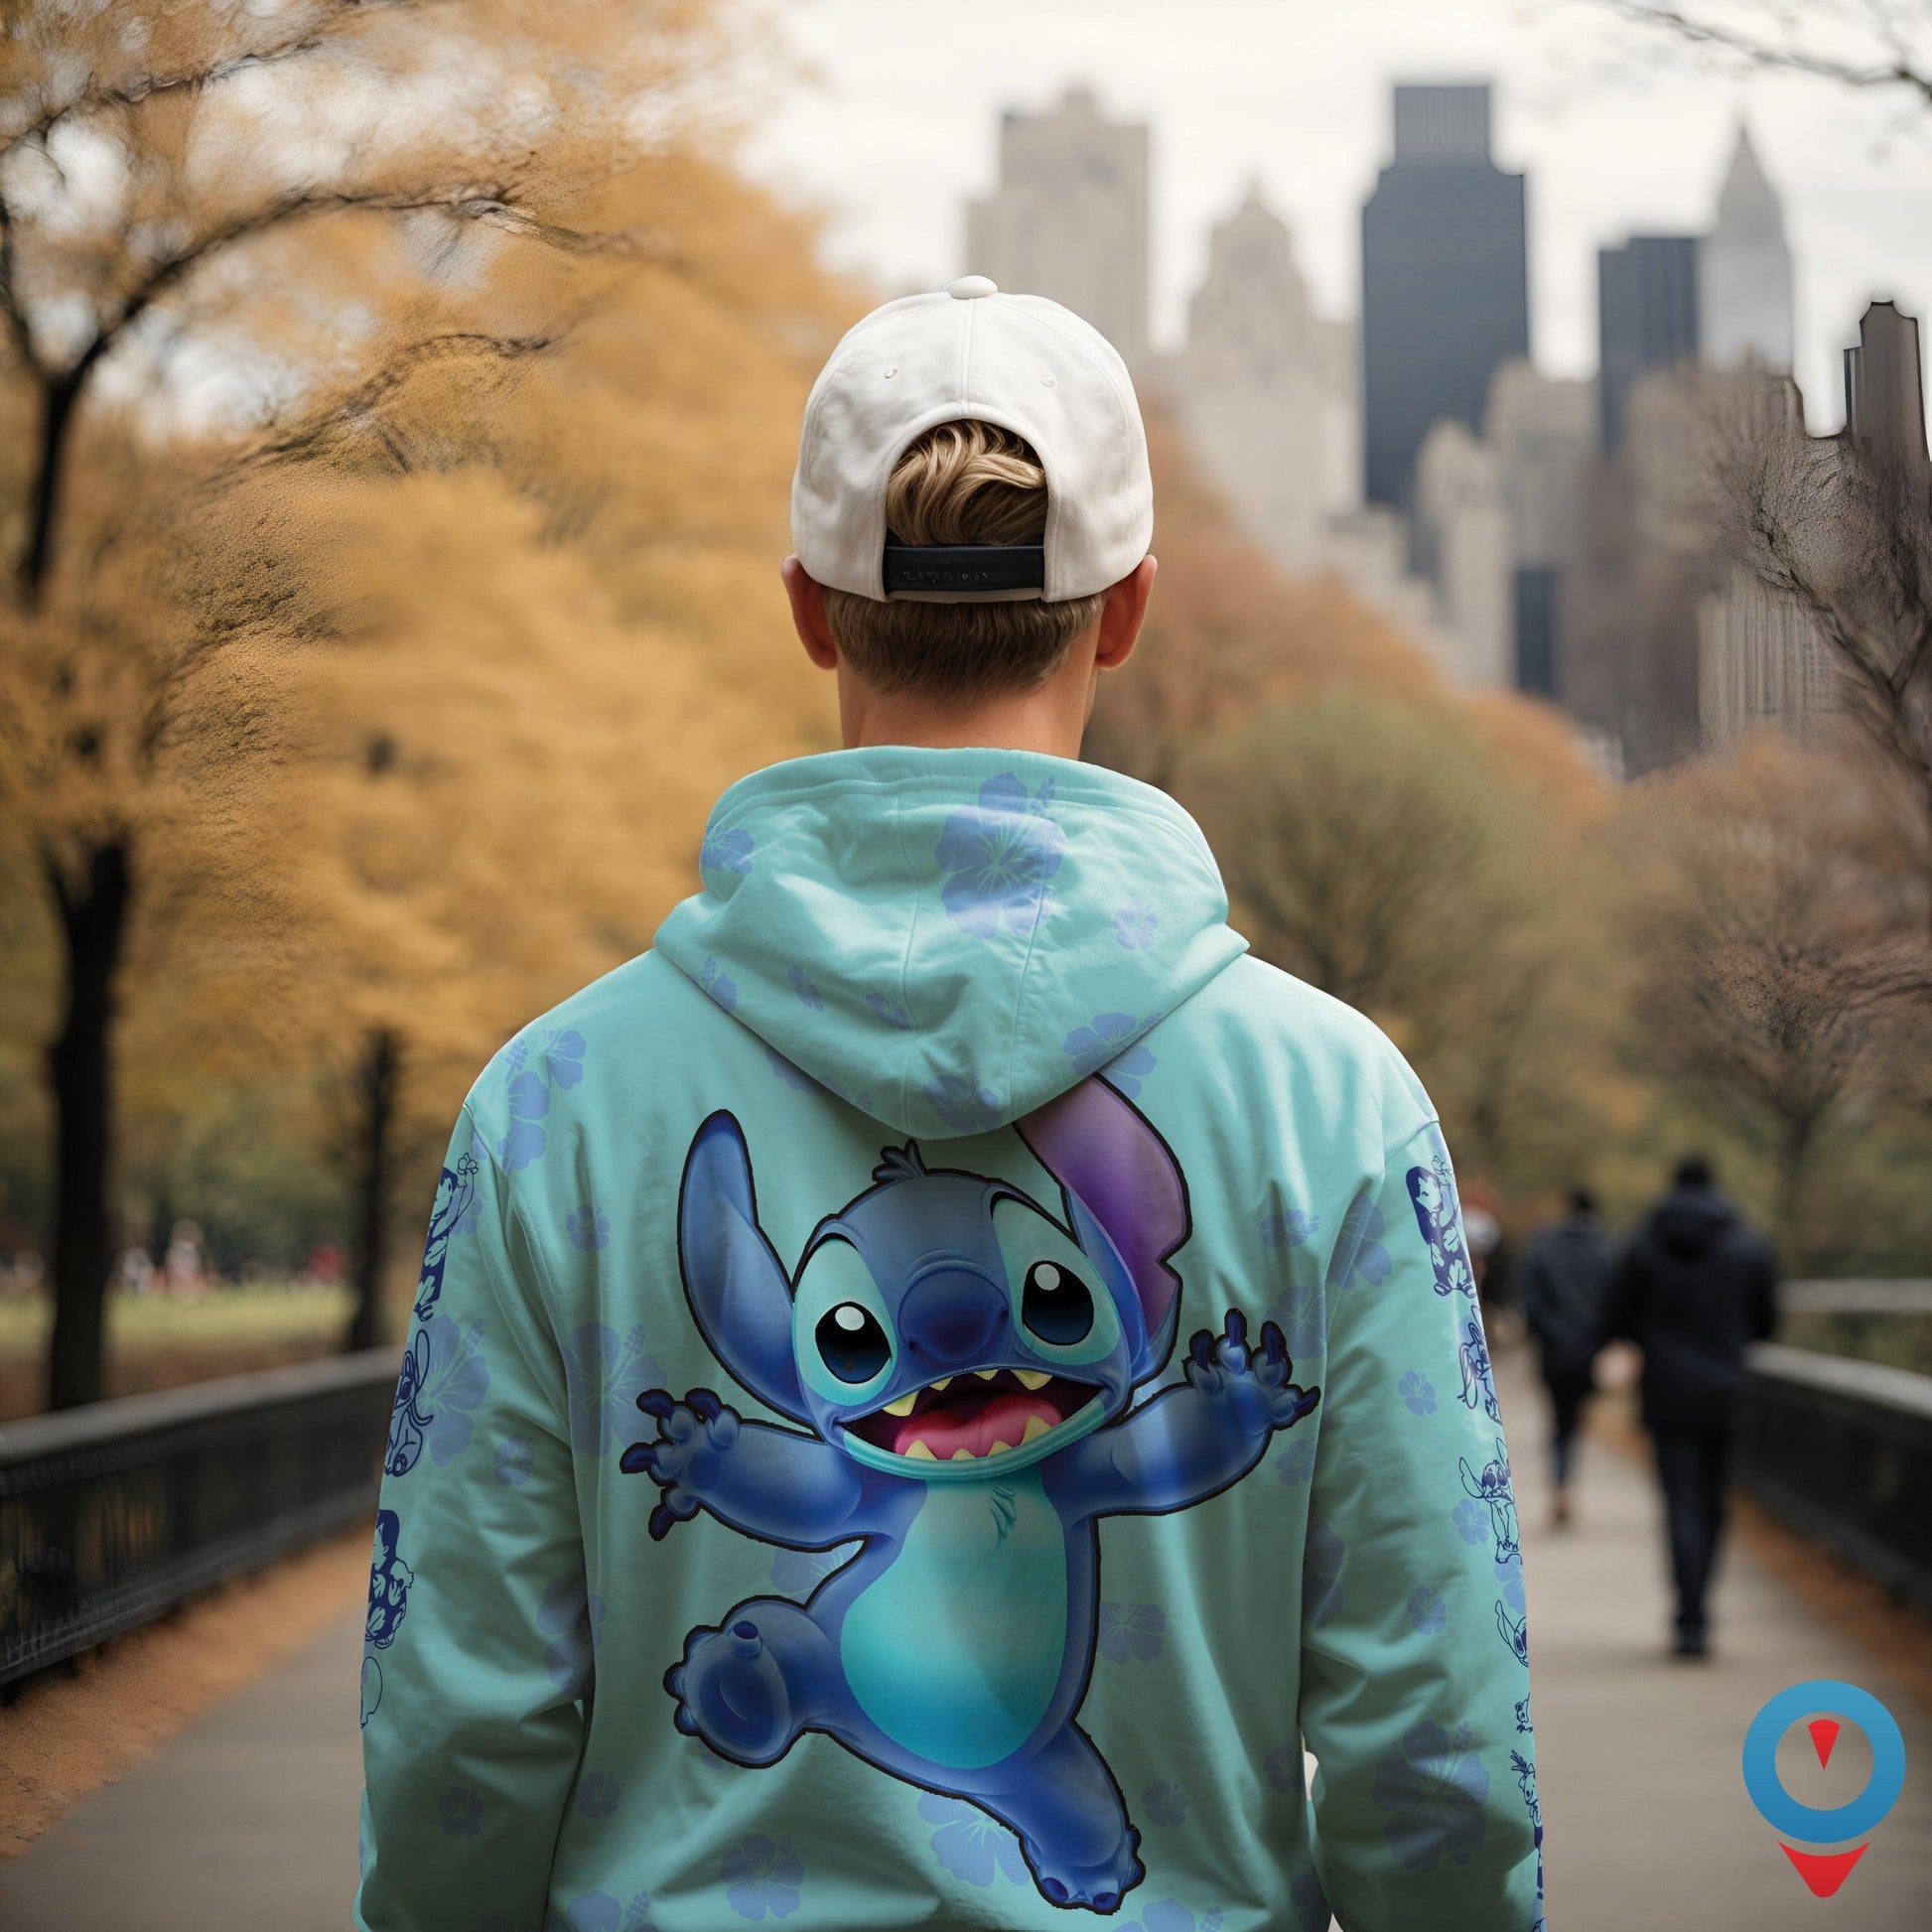 Stitch Hoodie: The Coolest and Funniest Pullover for Lilo & Stitch Fans